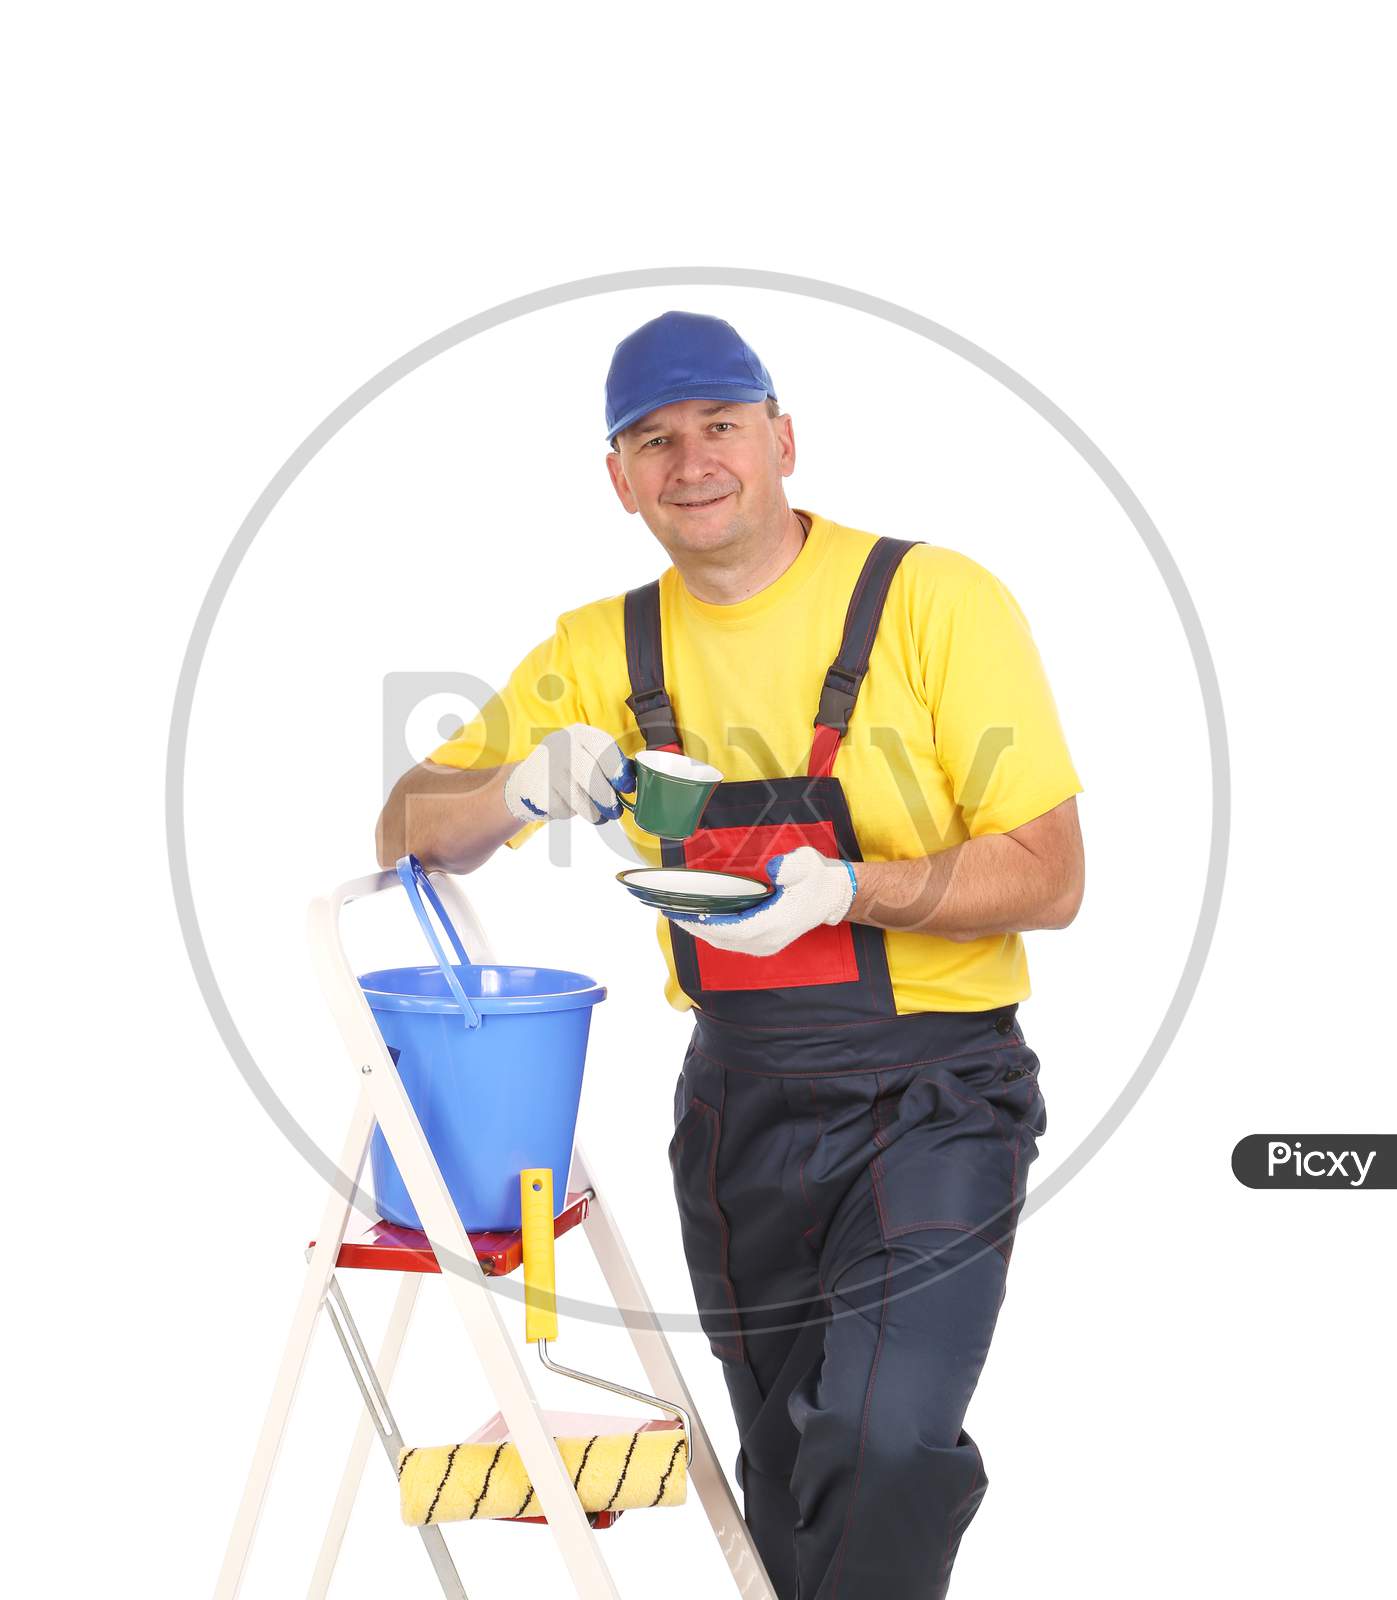 Worker On Ladder With Cup Of Tea. Isolated On A White Background.